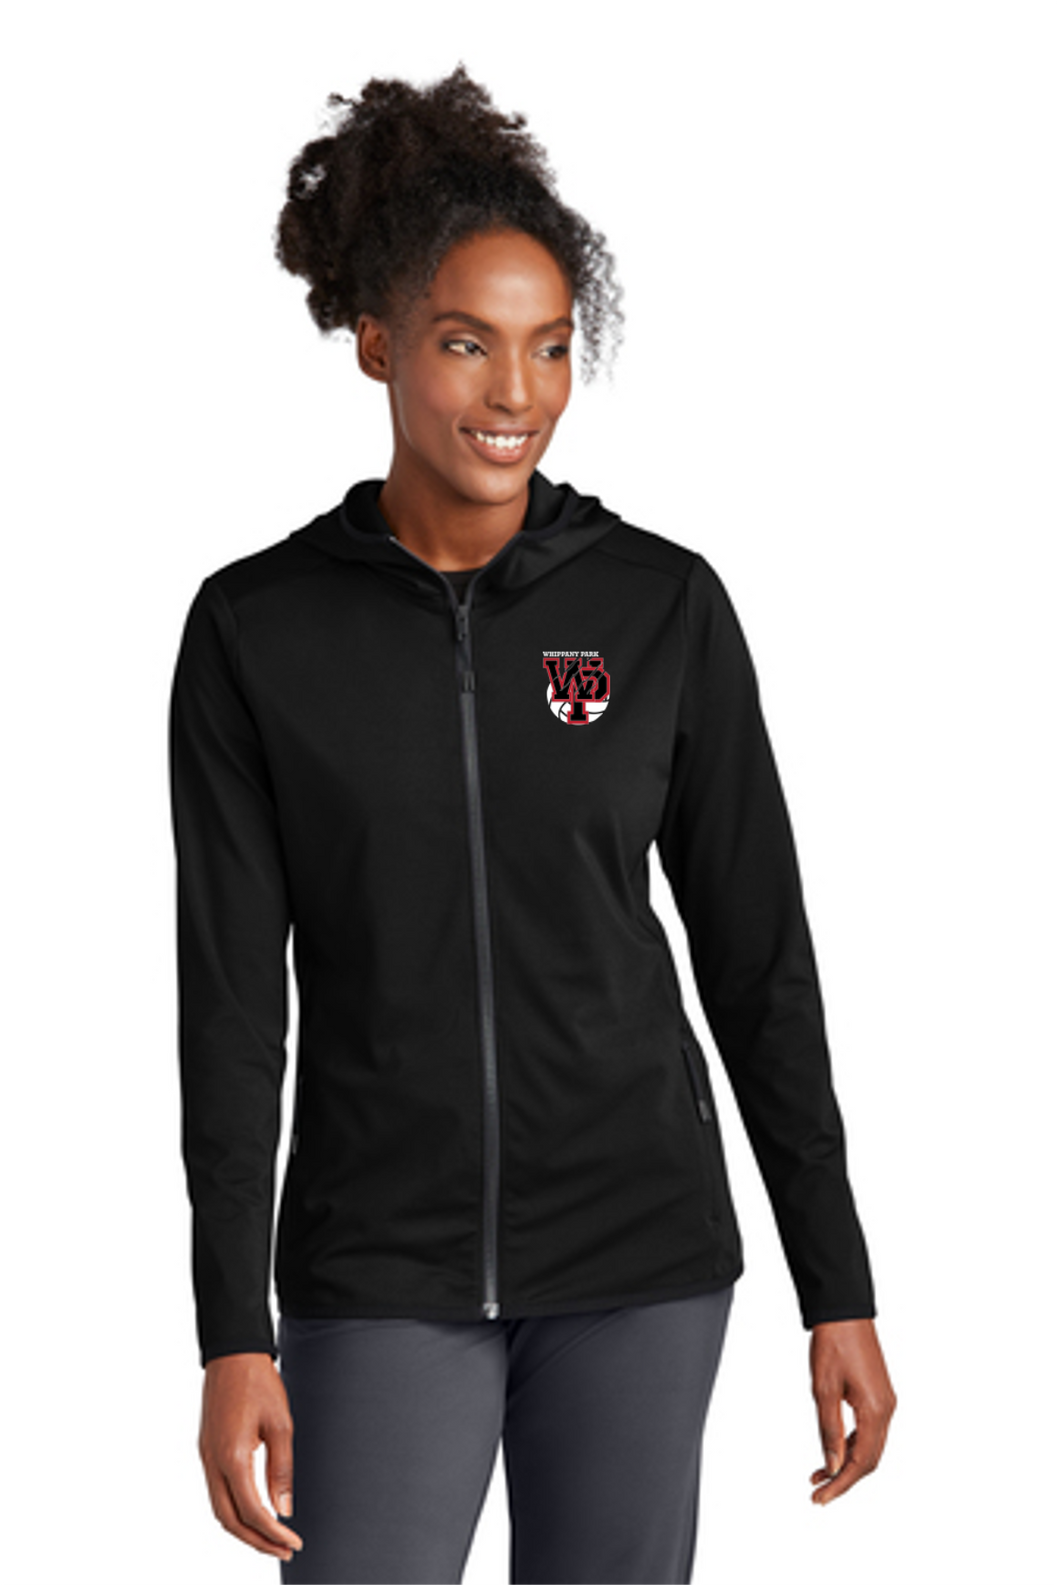 Ladies Circuit Hooded Full-Zip- WHIPPANY PARK VOLLEYBALL